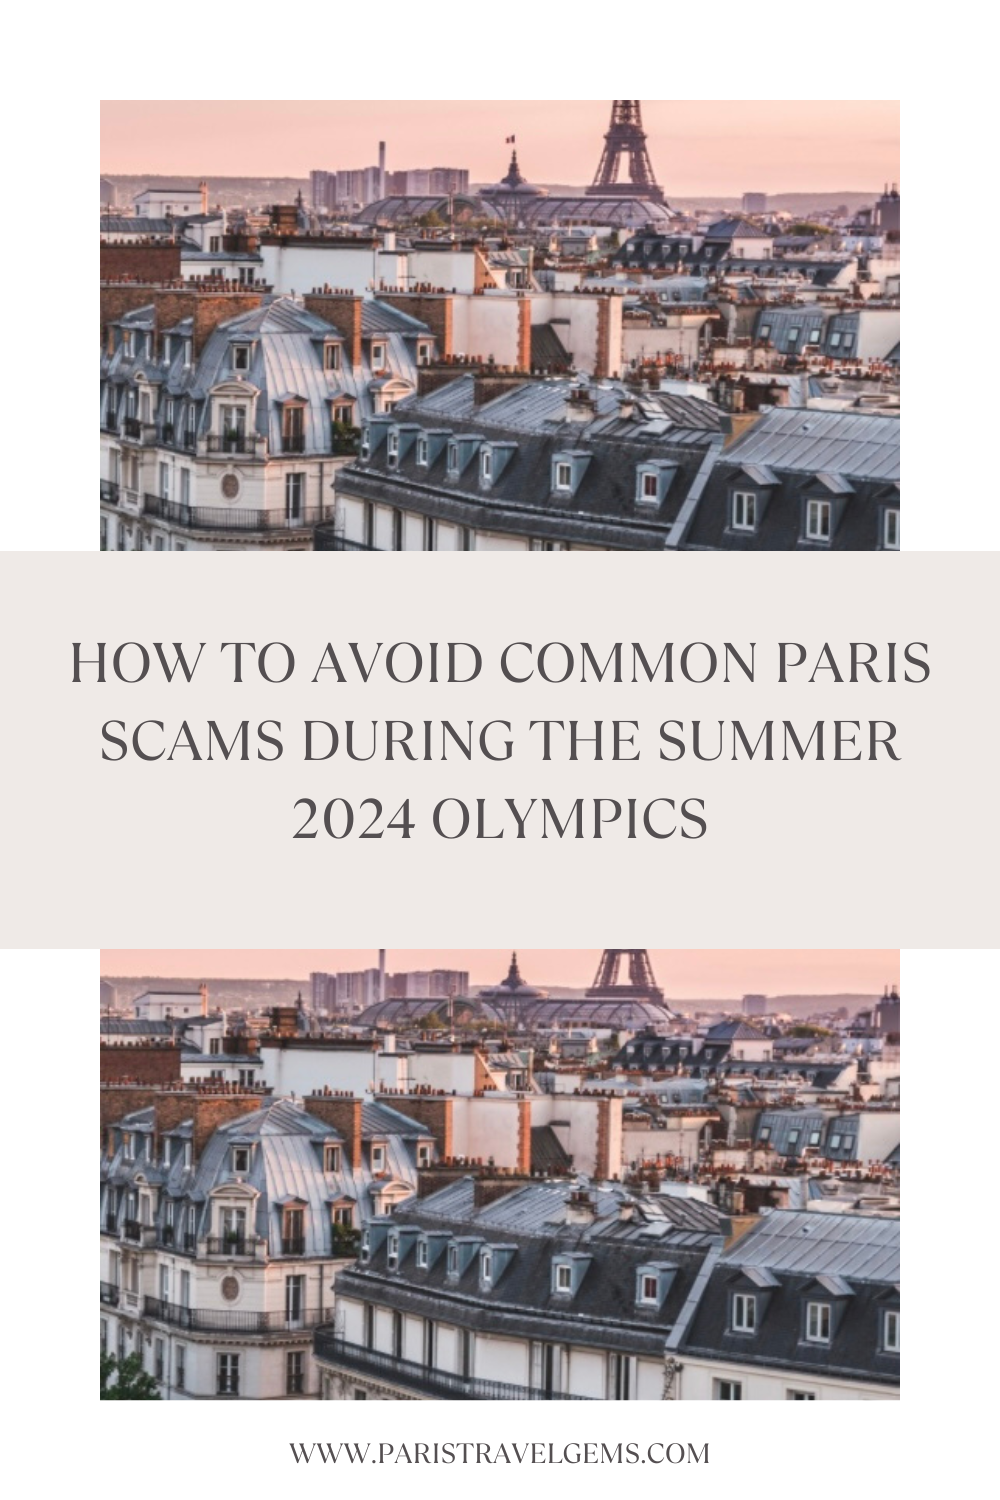 How to avoid common Paris scams during the summer 2024 Olympics